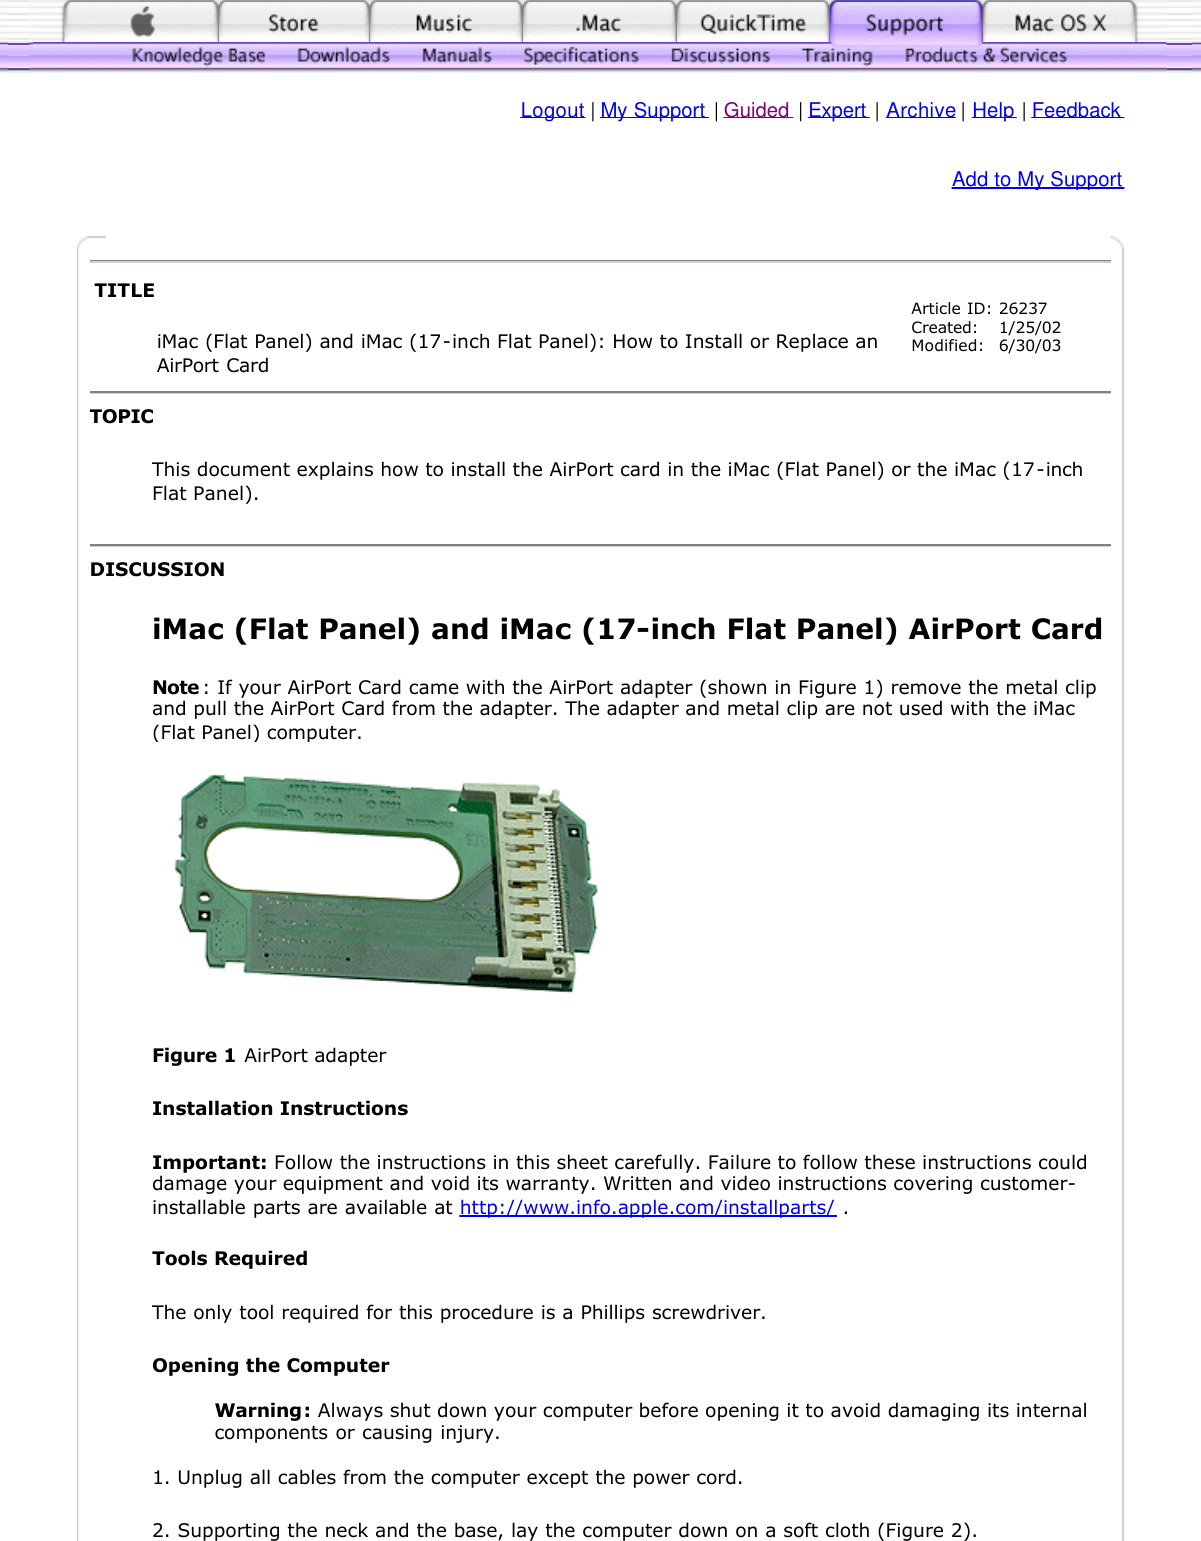   Logout | My Support | Guided | Expert | Archive | Help | Feedback Add to My SupportTOPIC This document explains how to install the AirPort card in the iMac (Flat Panel) or the iMac (17-inch Flat Panel). DISCUSSION iMac (Flat Panel) and iMac (17-inch Flat Panel) AirPort Card  Note : If your AirPort Card came with the AirPort adapter (shown in Figure 1) remove the metal clip and pull the AirPort Card from the adapter. The adapter and metal clip are not used with the iMac (Flat Panel) computer.  Figure 1 AirPort adapter  Installation Instructions  Important: Follow the instructions in this sheet carefully. Failure to follow these instructions could damage your equipment and void its warranty. Written and video instructions covering customer-installable parts are available at http://www.info.apple.com/installparts/ .  Tools Required  The only tool required for this procedure is a Phillips screwdriver.  Opening the Computer   Warning: Always shut down your computer before opening it to avoid damaging its internal components or causing injury.   1. Unplug all cables from the computer except the power cord. 2. Supporting the neck and the base, lay the computer down on a soft cloth (Figure 2).  TITLE iMac (Flat Panel) and iMac (17-inch Flat Panel): How to Install or Replace an AirPort Card Article ID: Created: Modified:26237 1/25/02 6/30/03